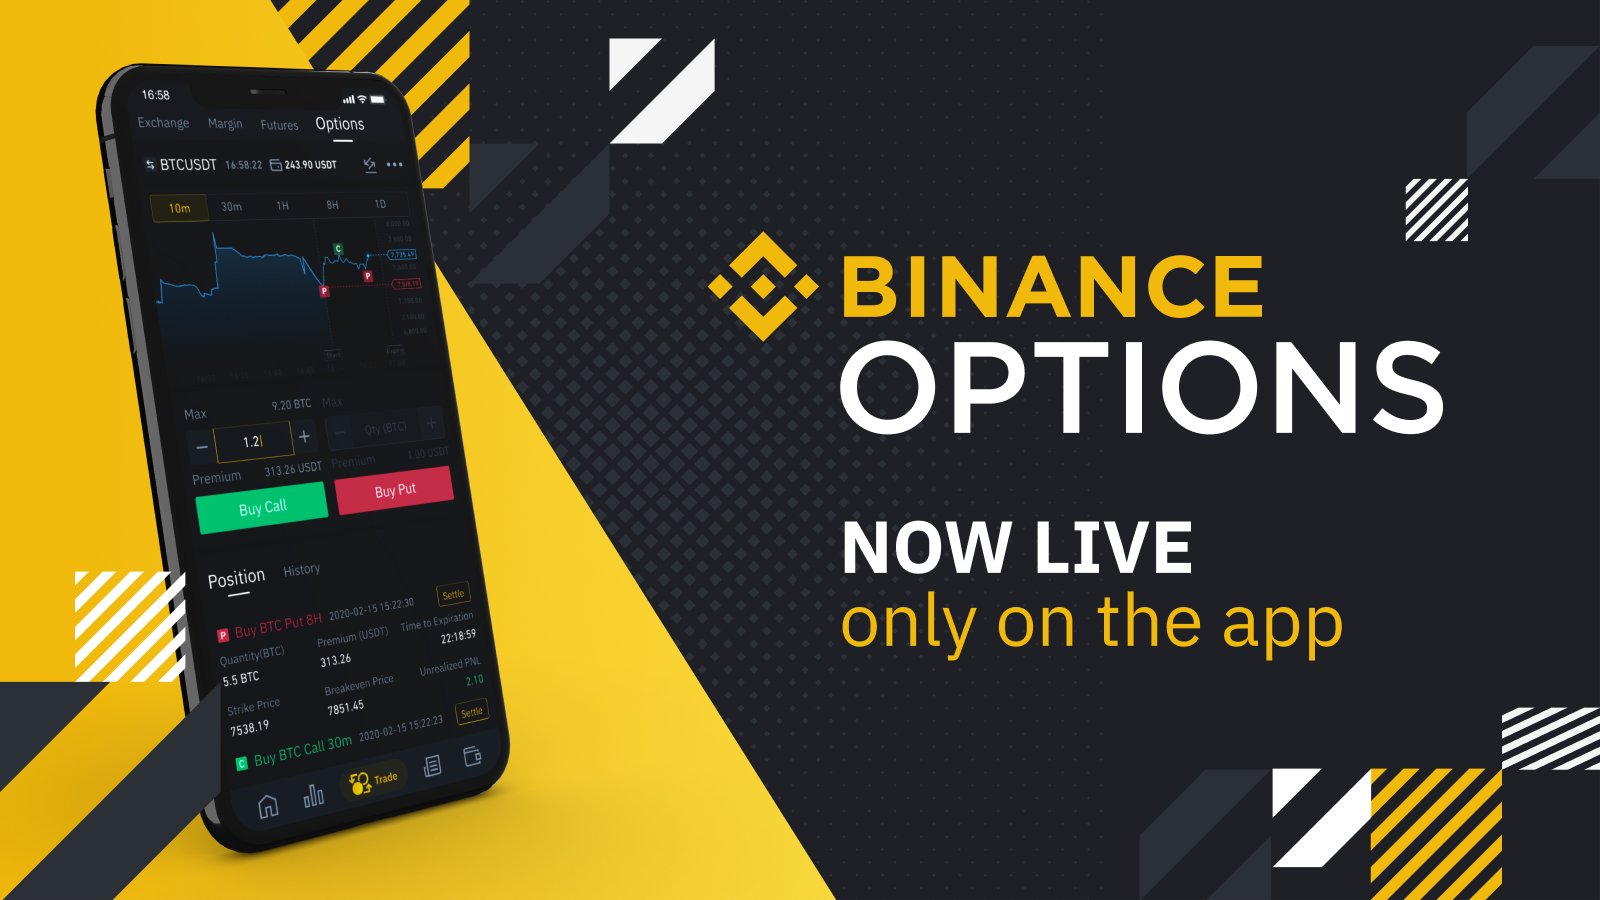 Binance Launches Option Trading on its Mobile App ...